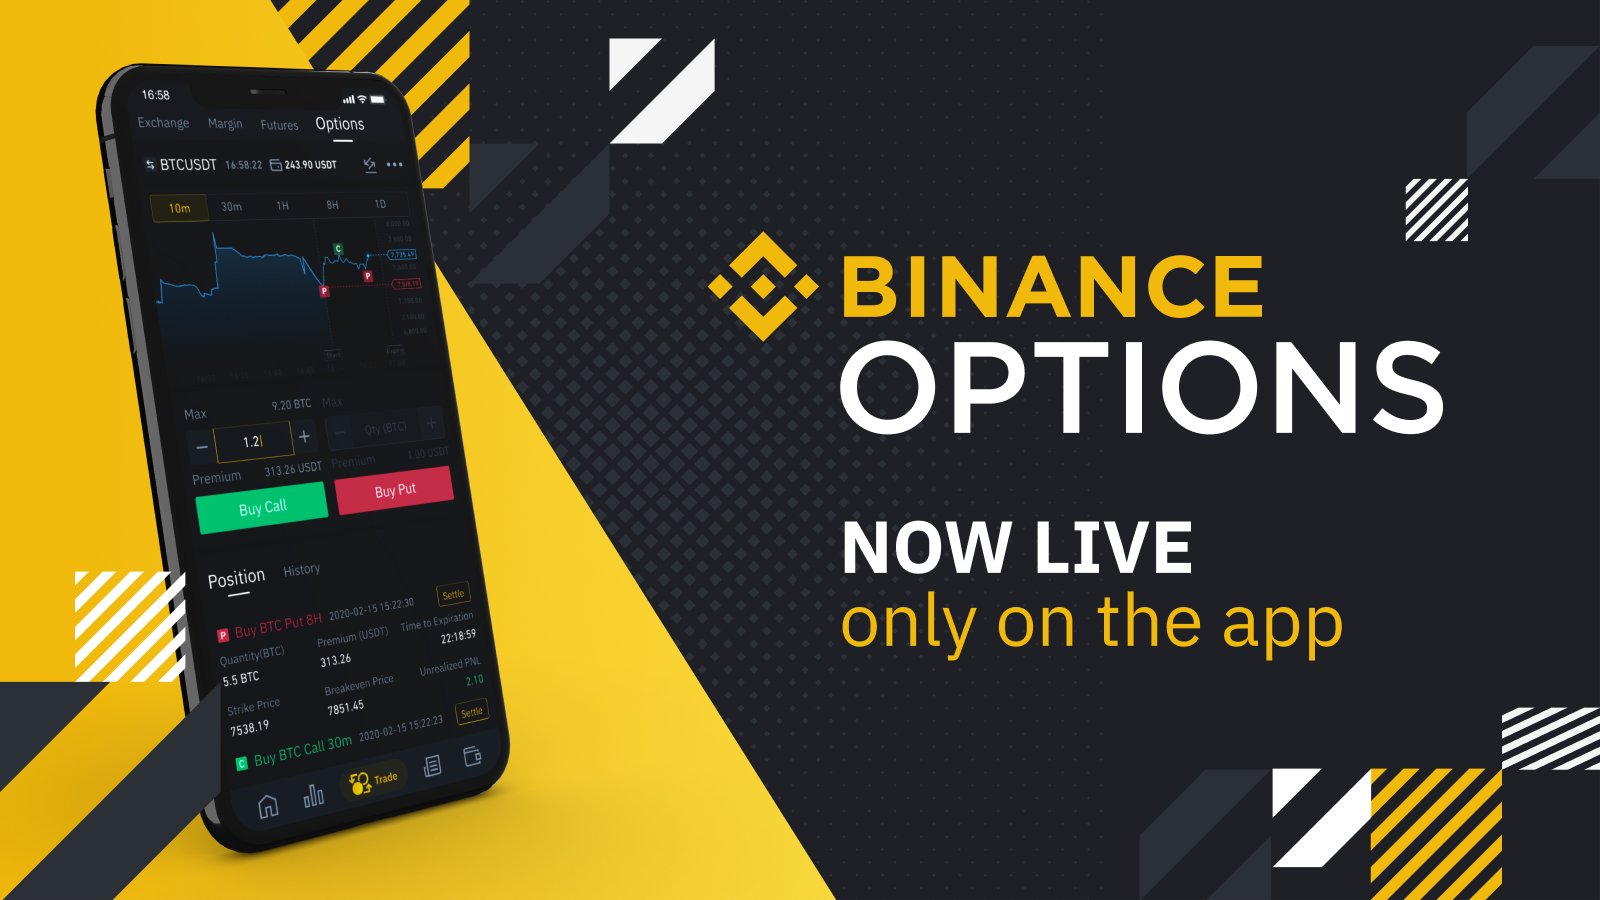 Binance Launches Option Trading on its Mobile App ...